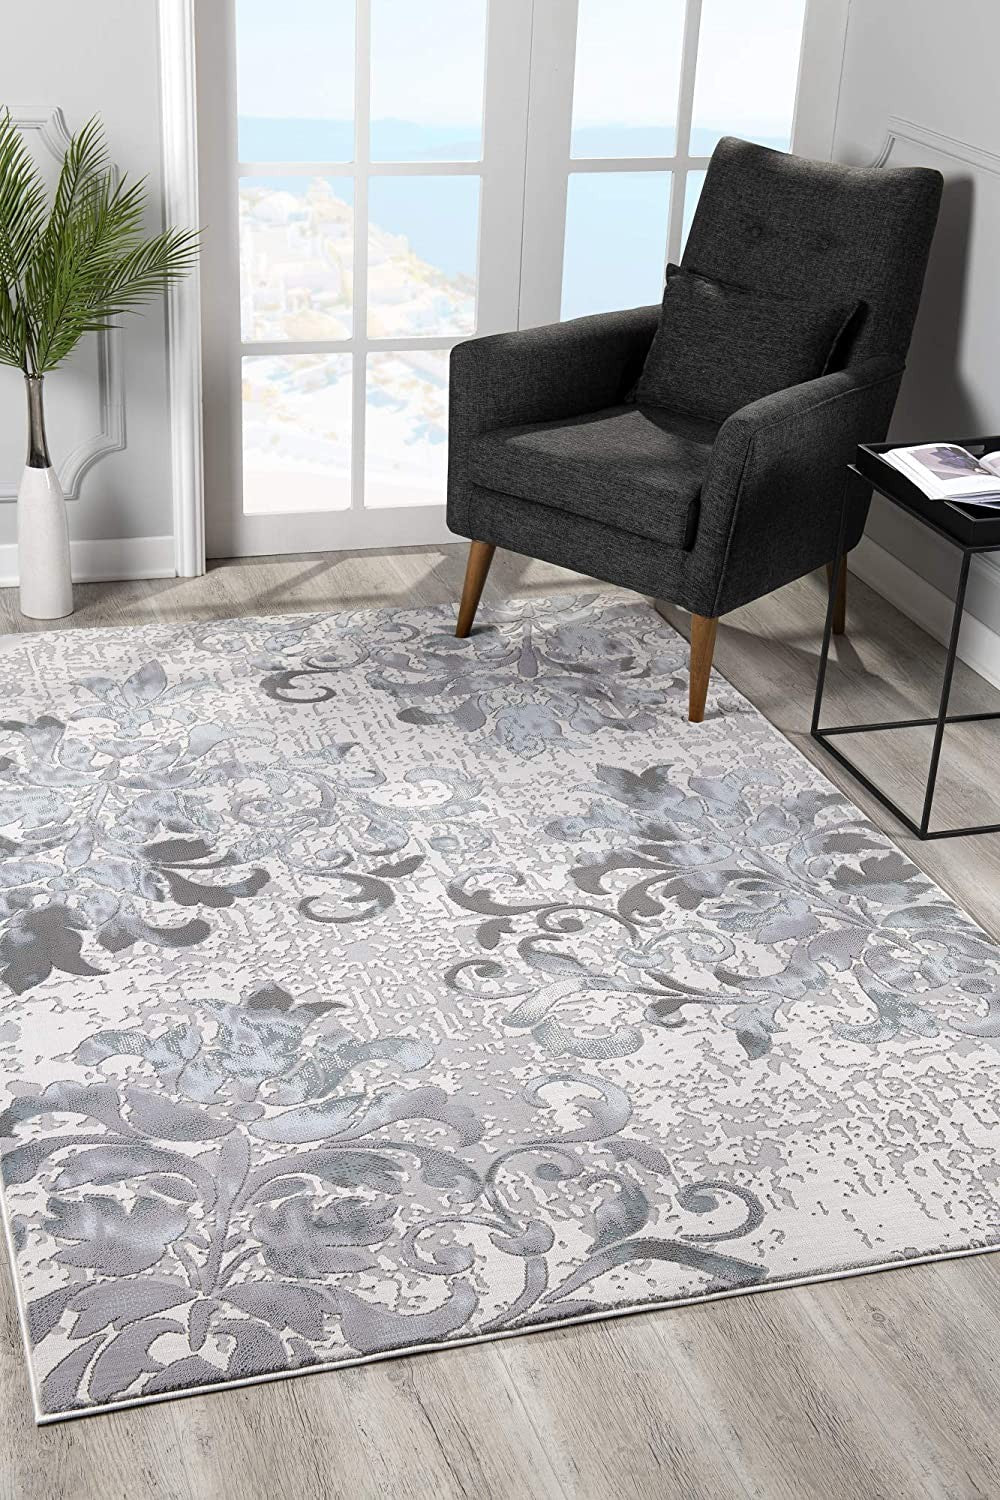 5’ X 8’ Blue And Gray Floral Filigree Area Rug